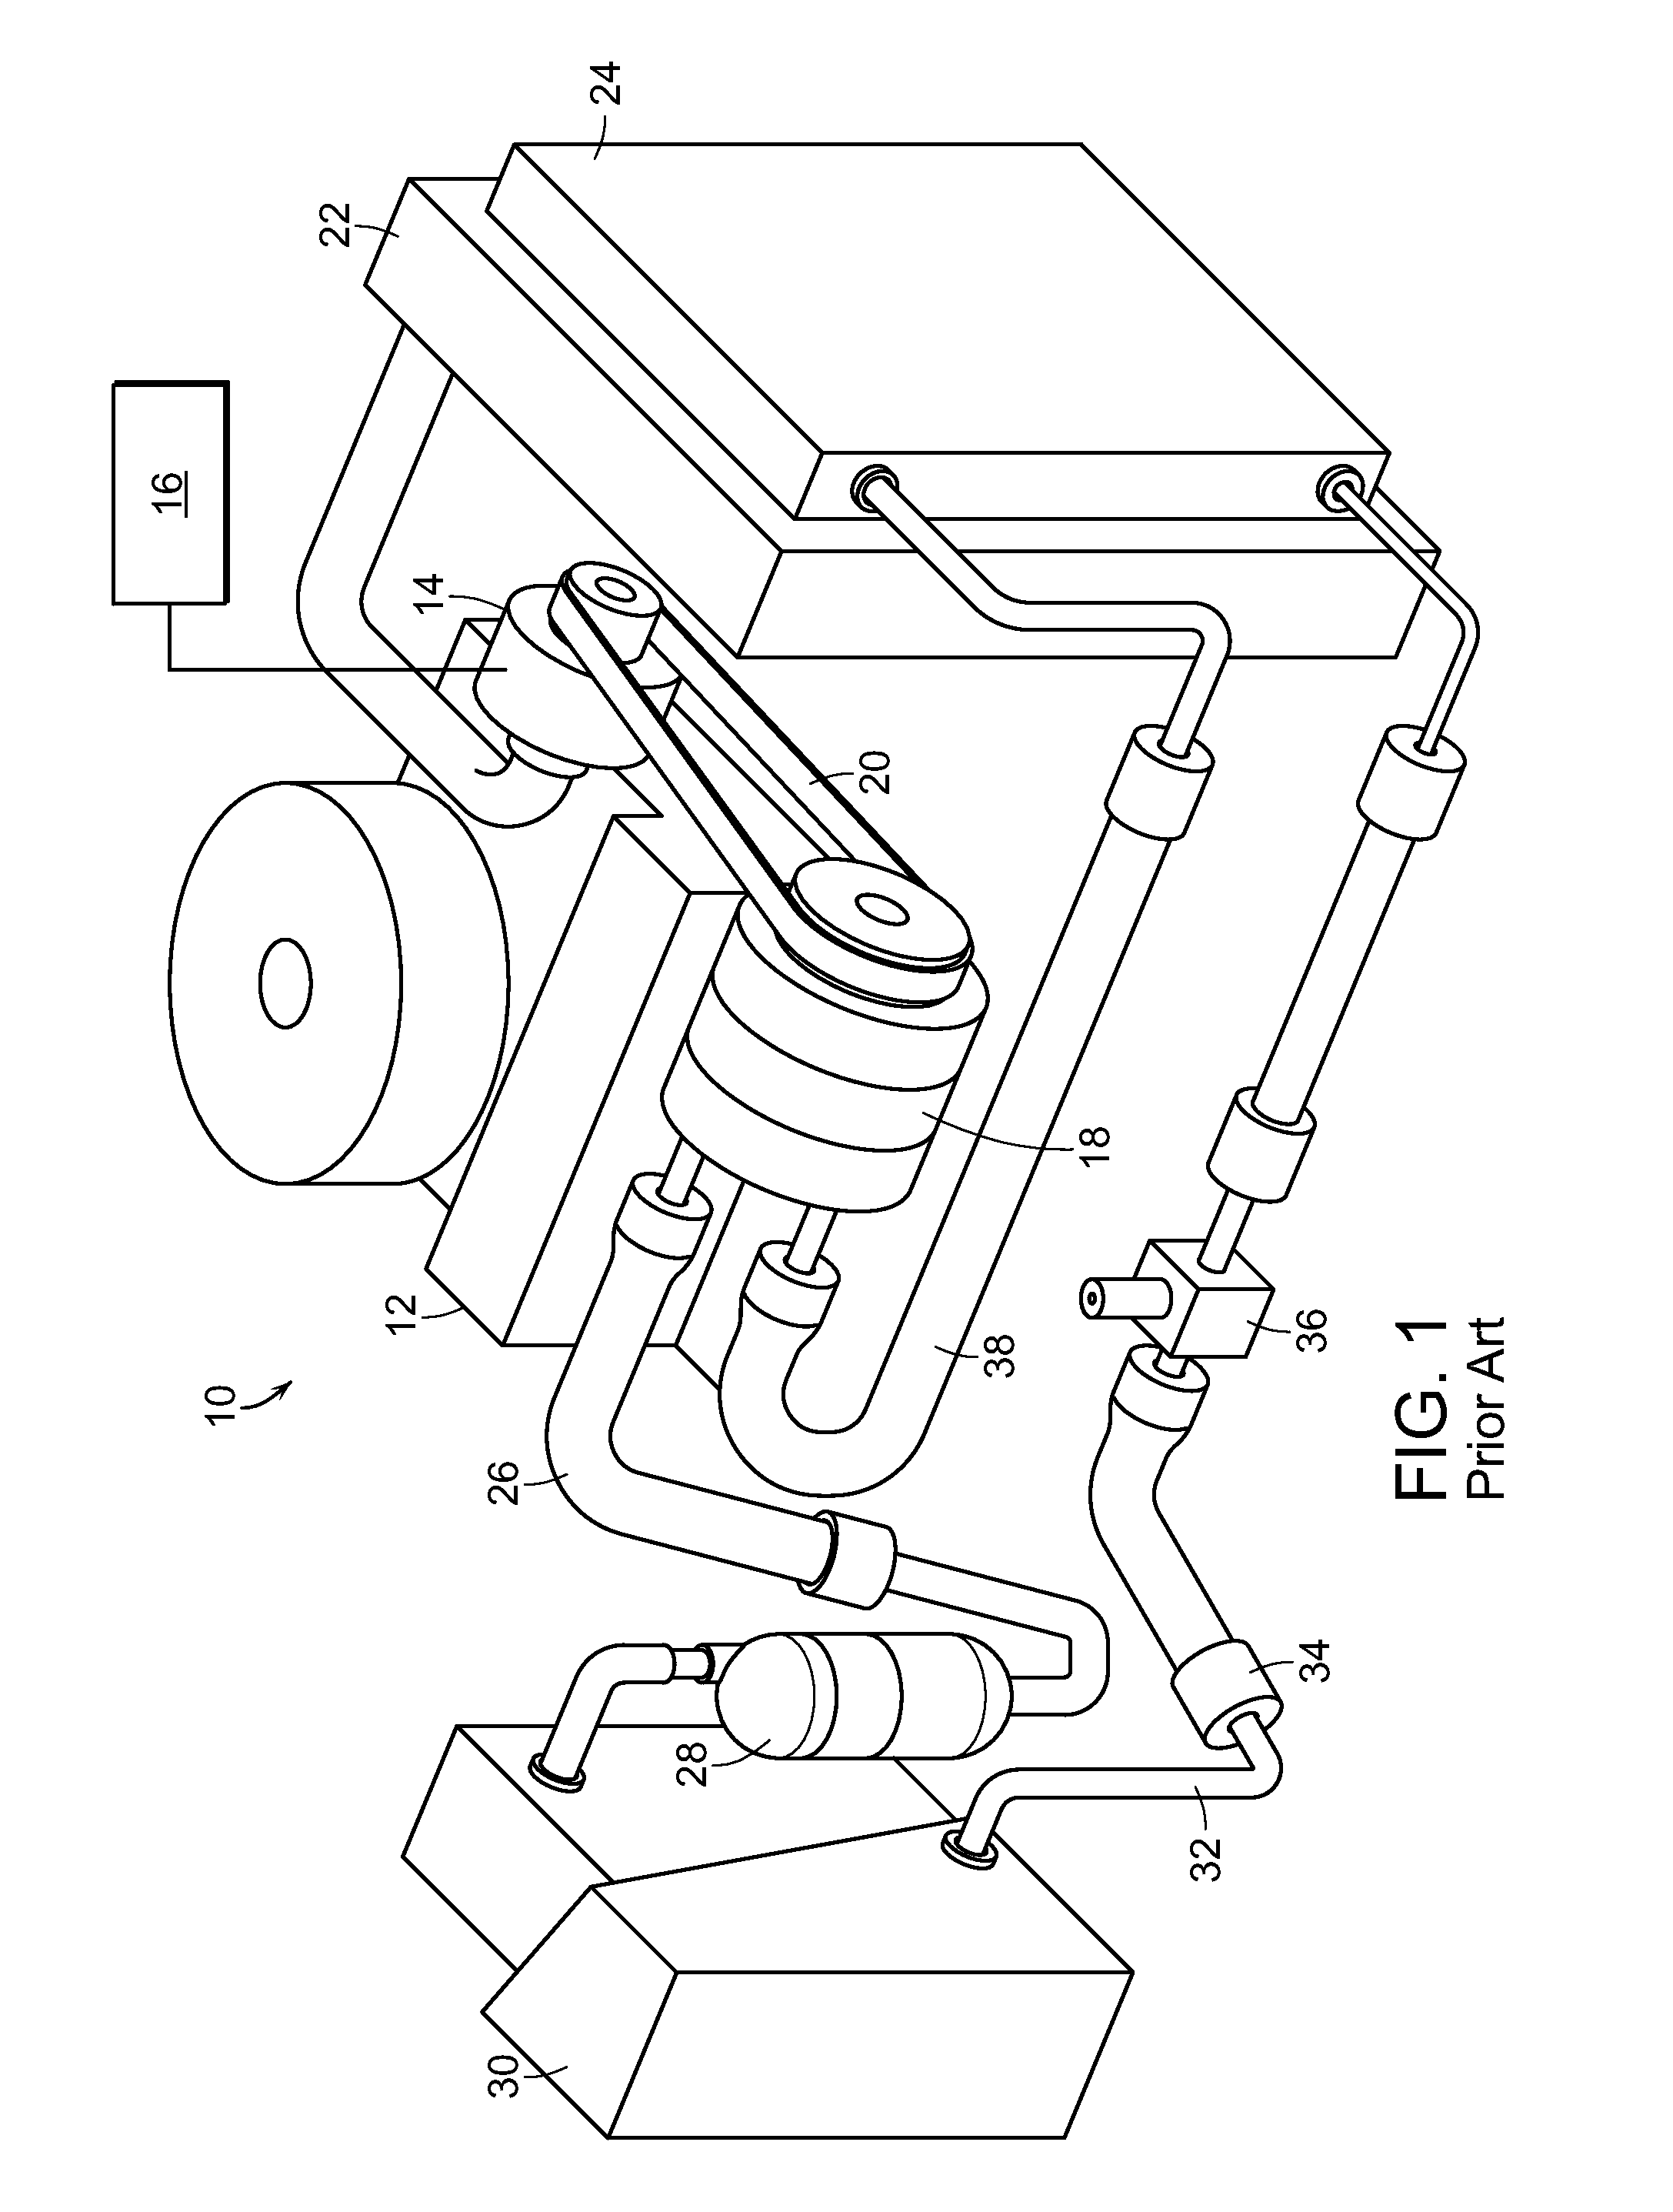 Vehicle occupant protection and engine idle reduction system